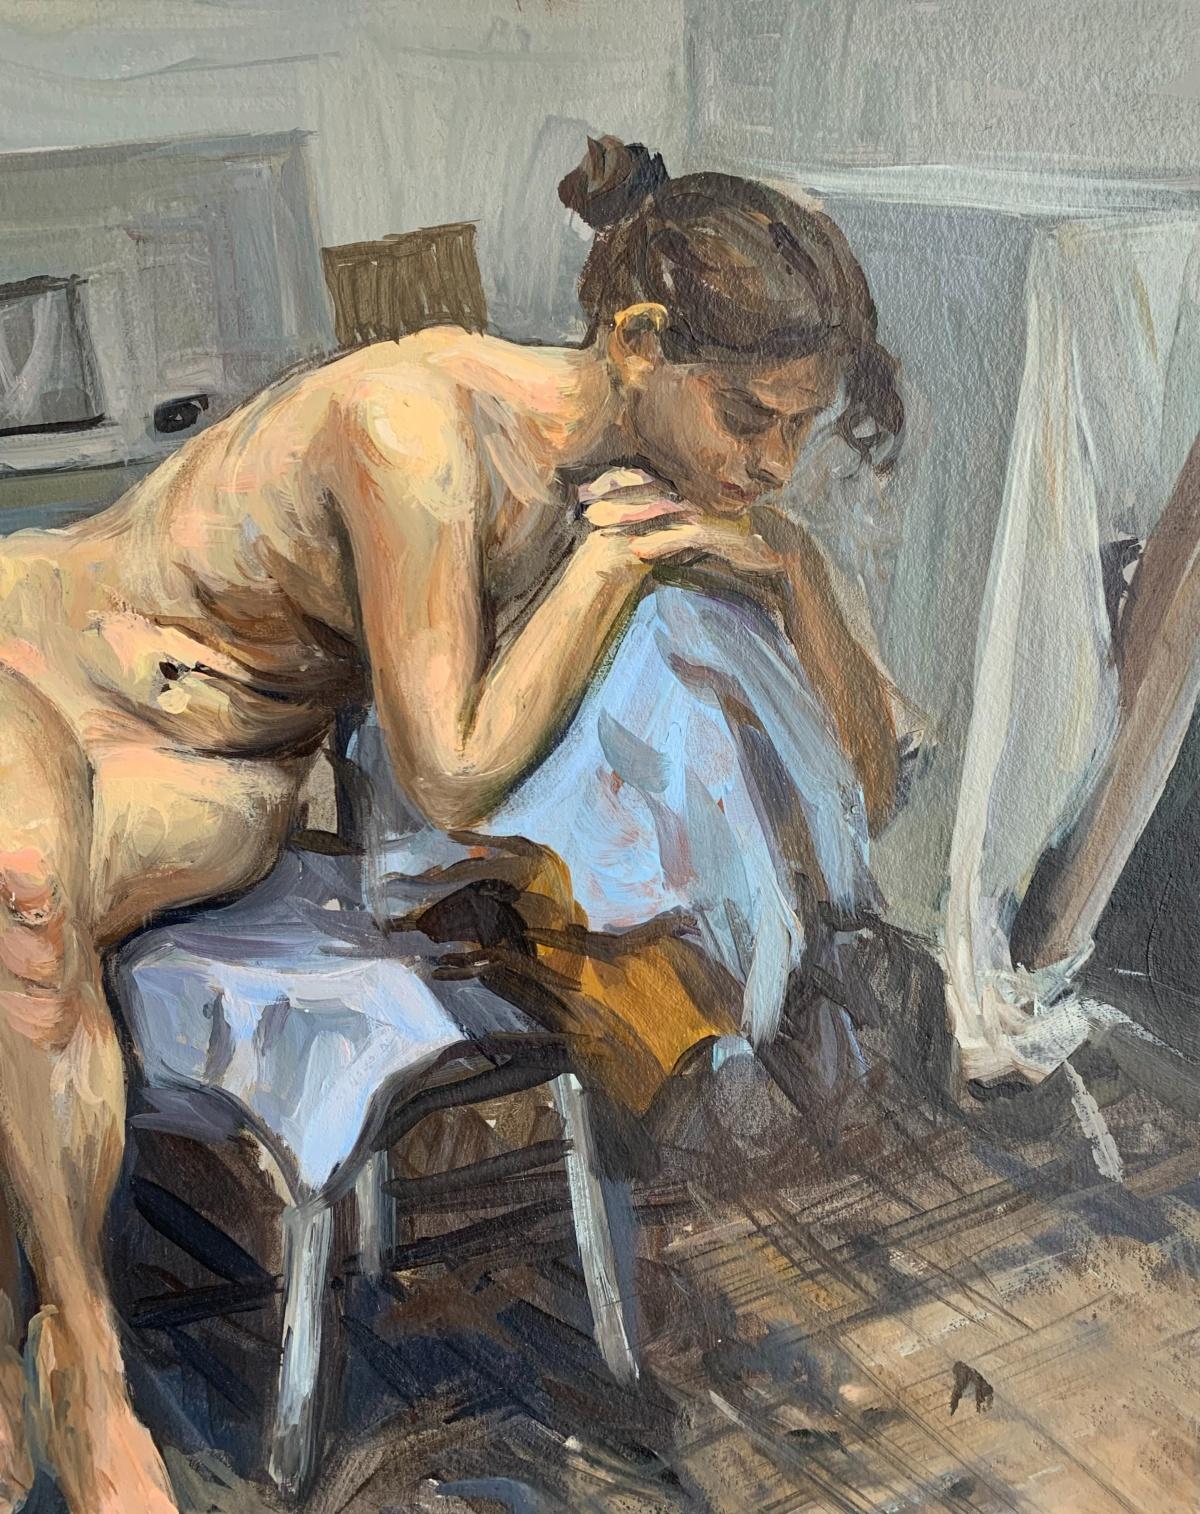 Anna in atelier - Realistic oil painting, Nude, Young Polish artist - Naturalistic Painting by Agnieszka Staak-Janczarska